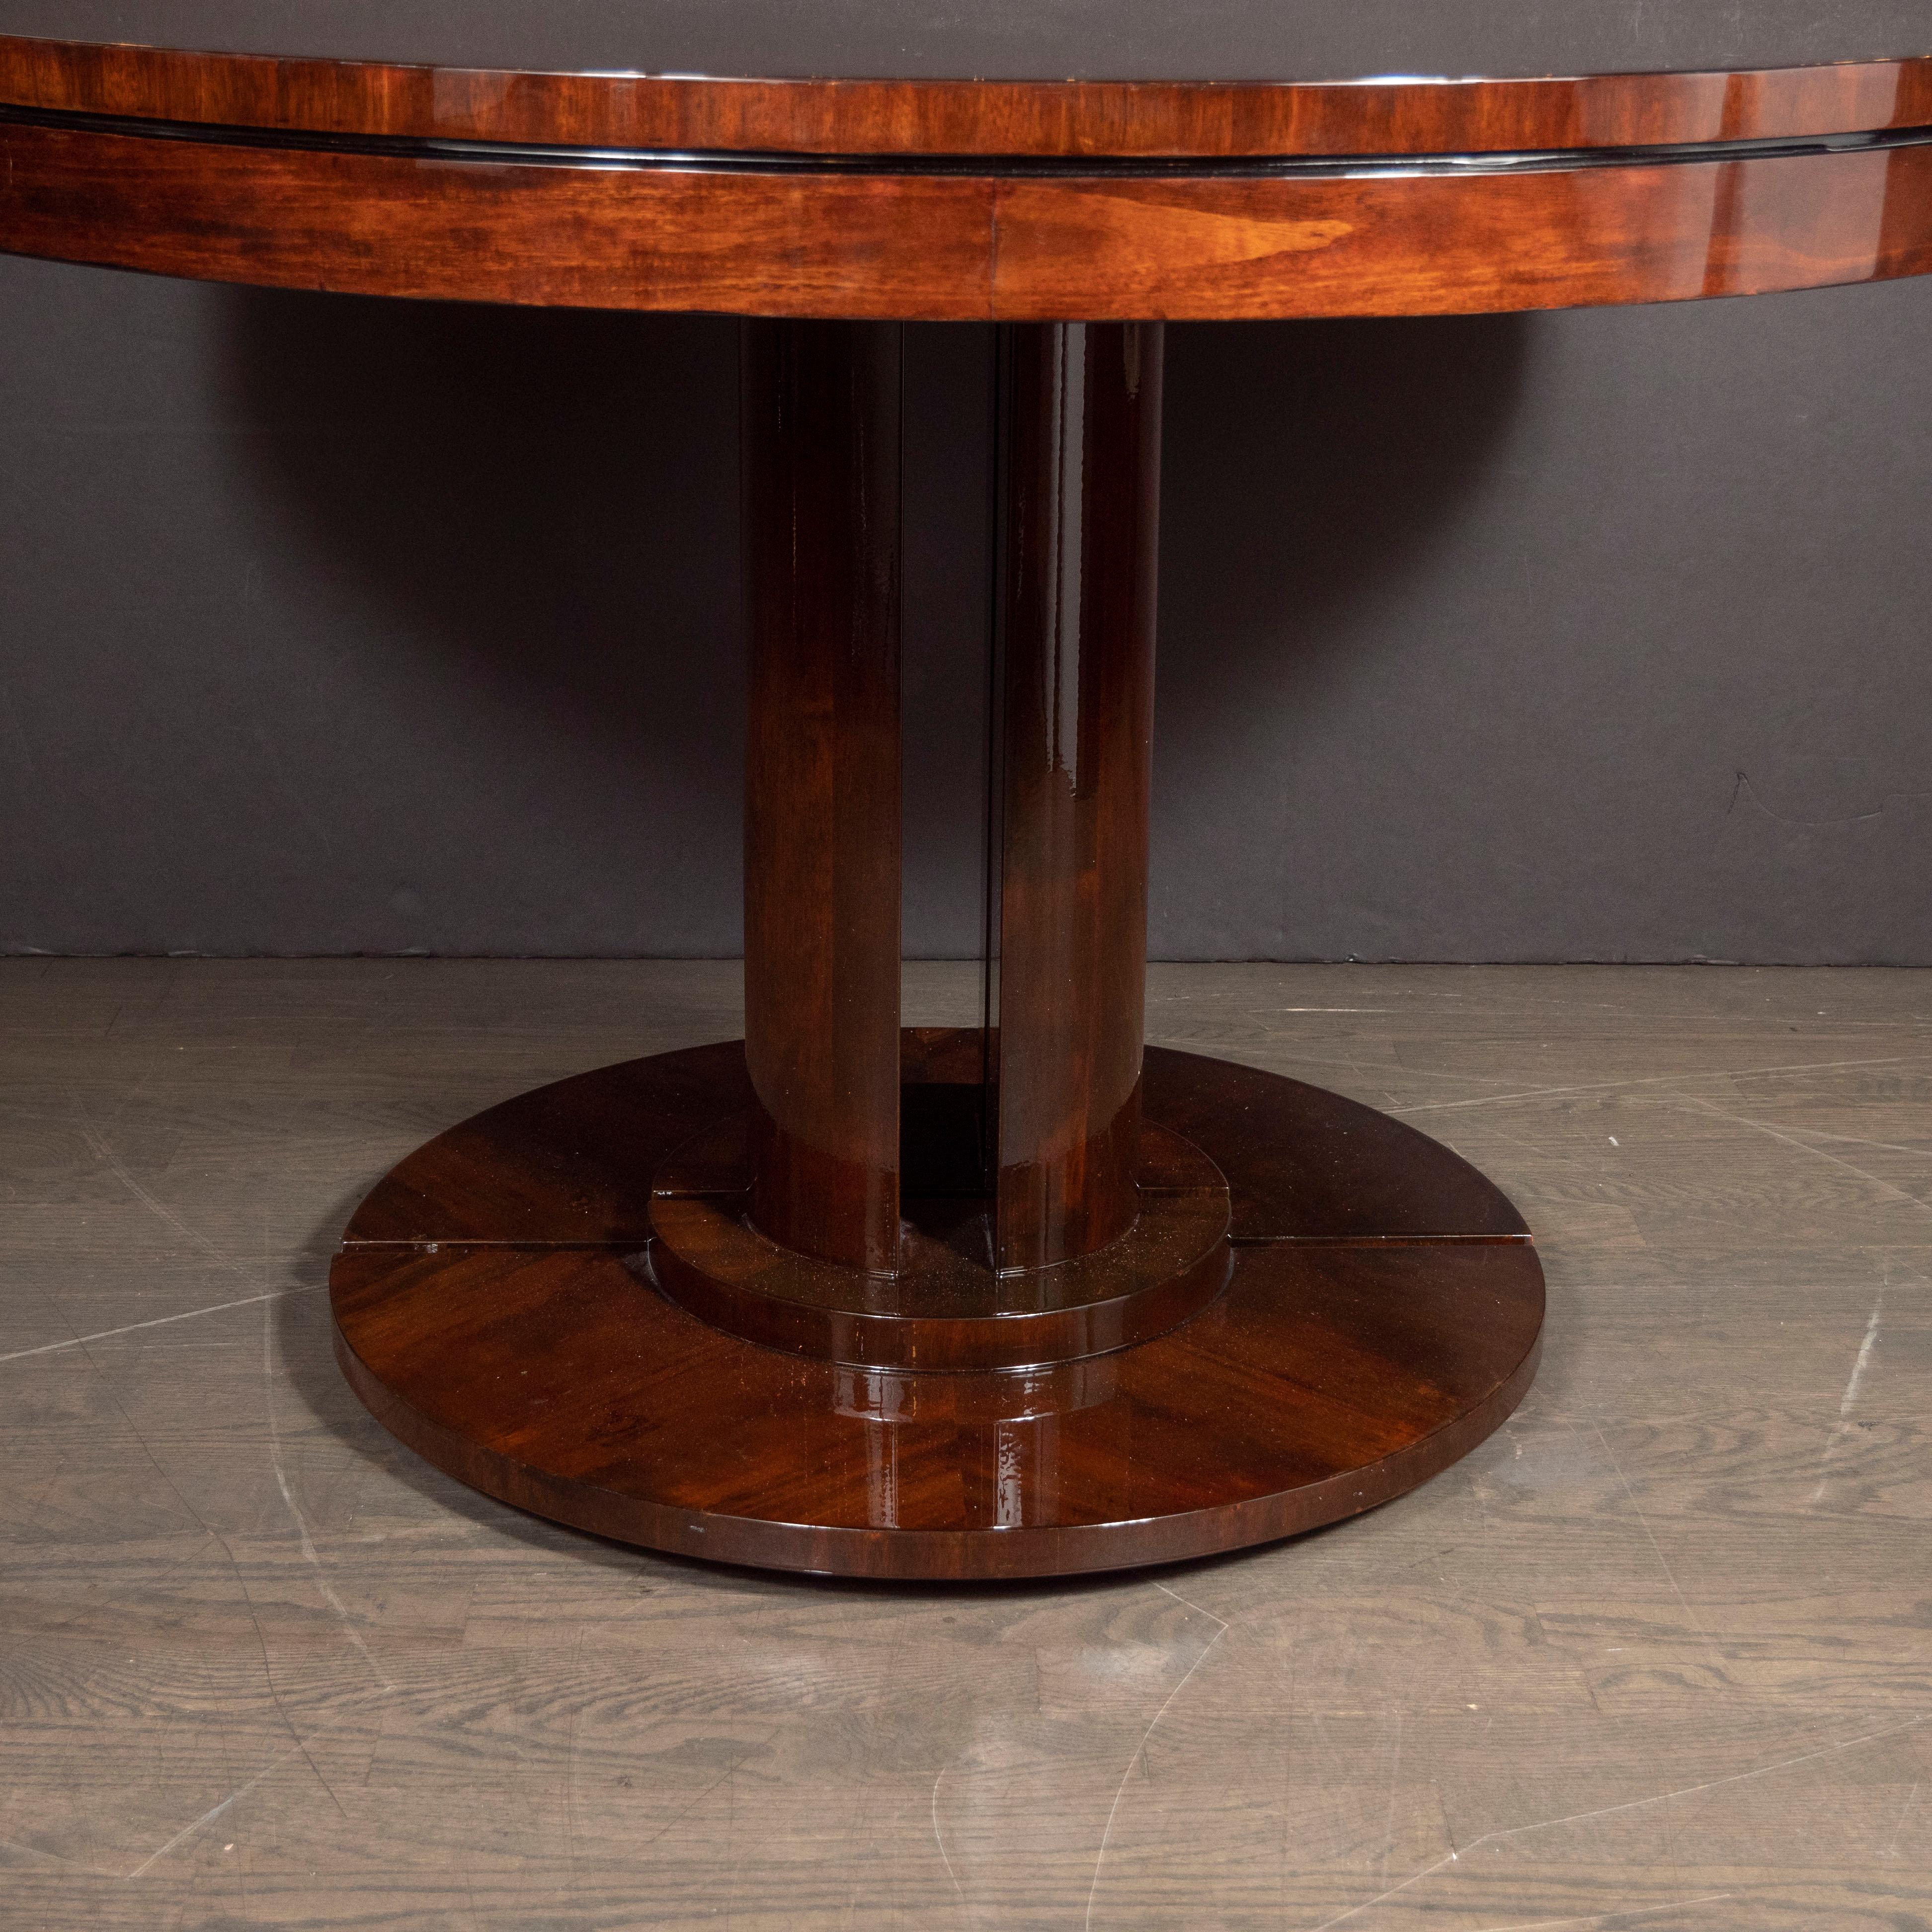 This elegant and stately Art Deco dining/ center table was realized in the United States, circa 1930. It features a circular base and top executed in beautiful walnut with streamlined supports. Two leaves accompany the table, allowing it to be